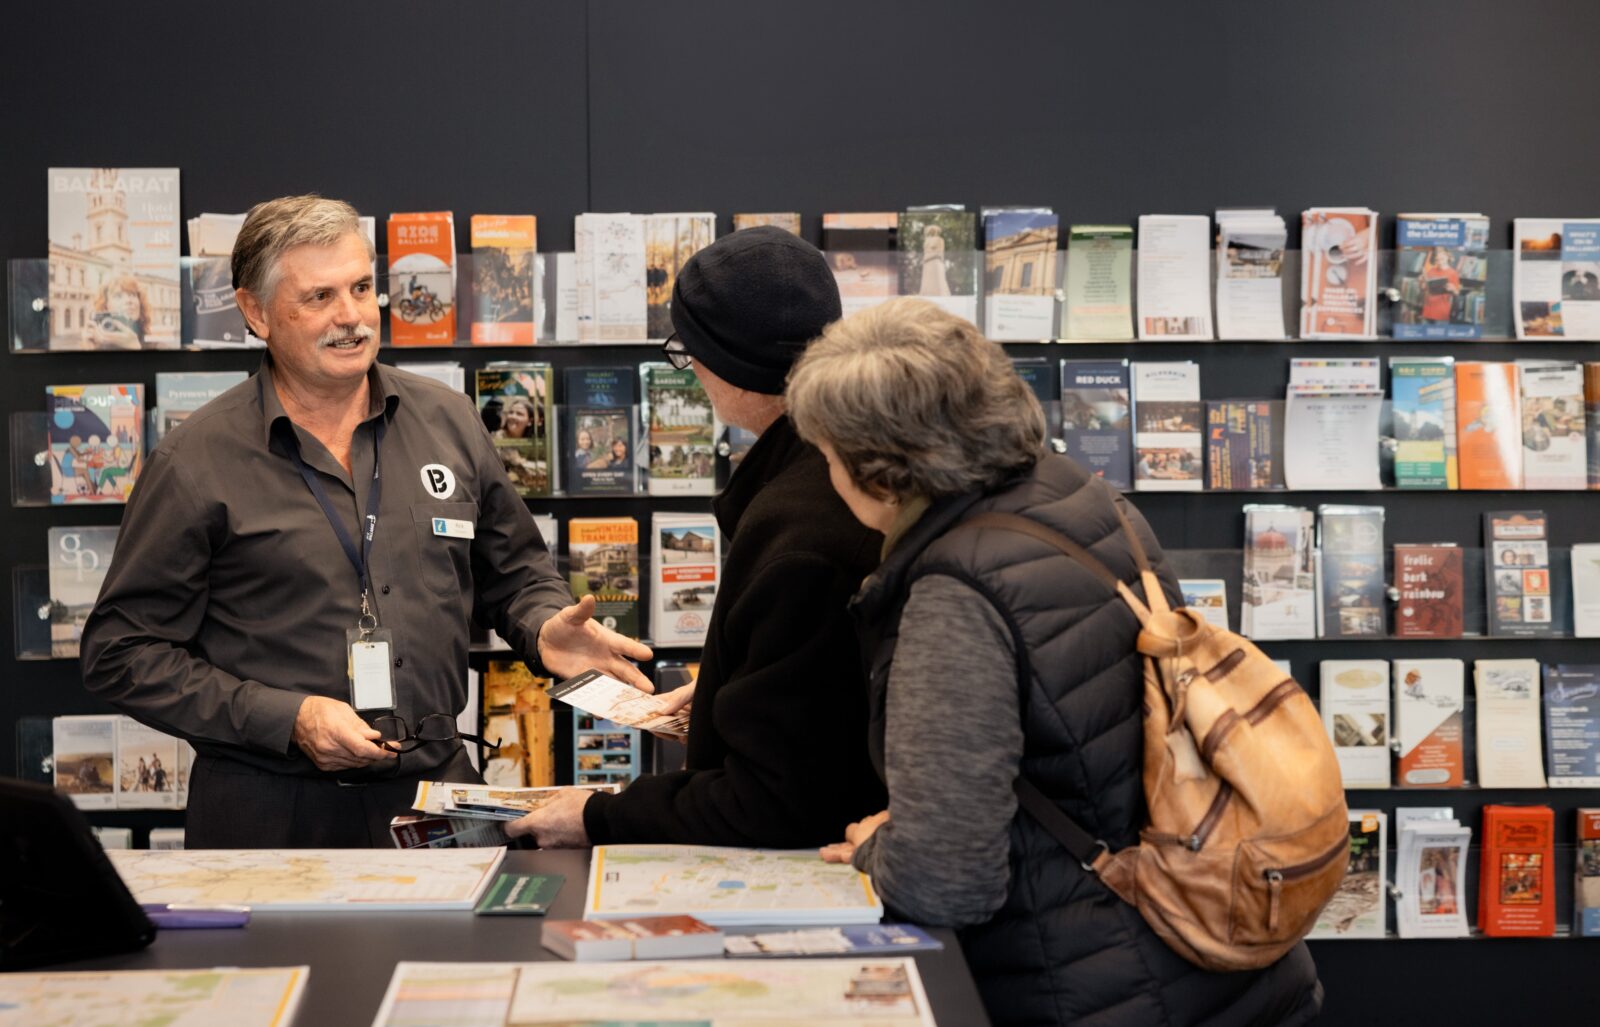 Rick standing in front of a brochure wall, helping two visitors